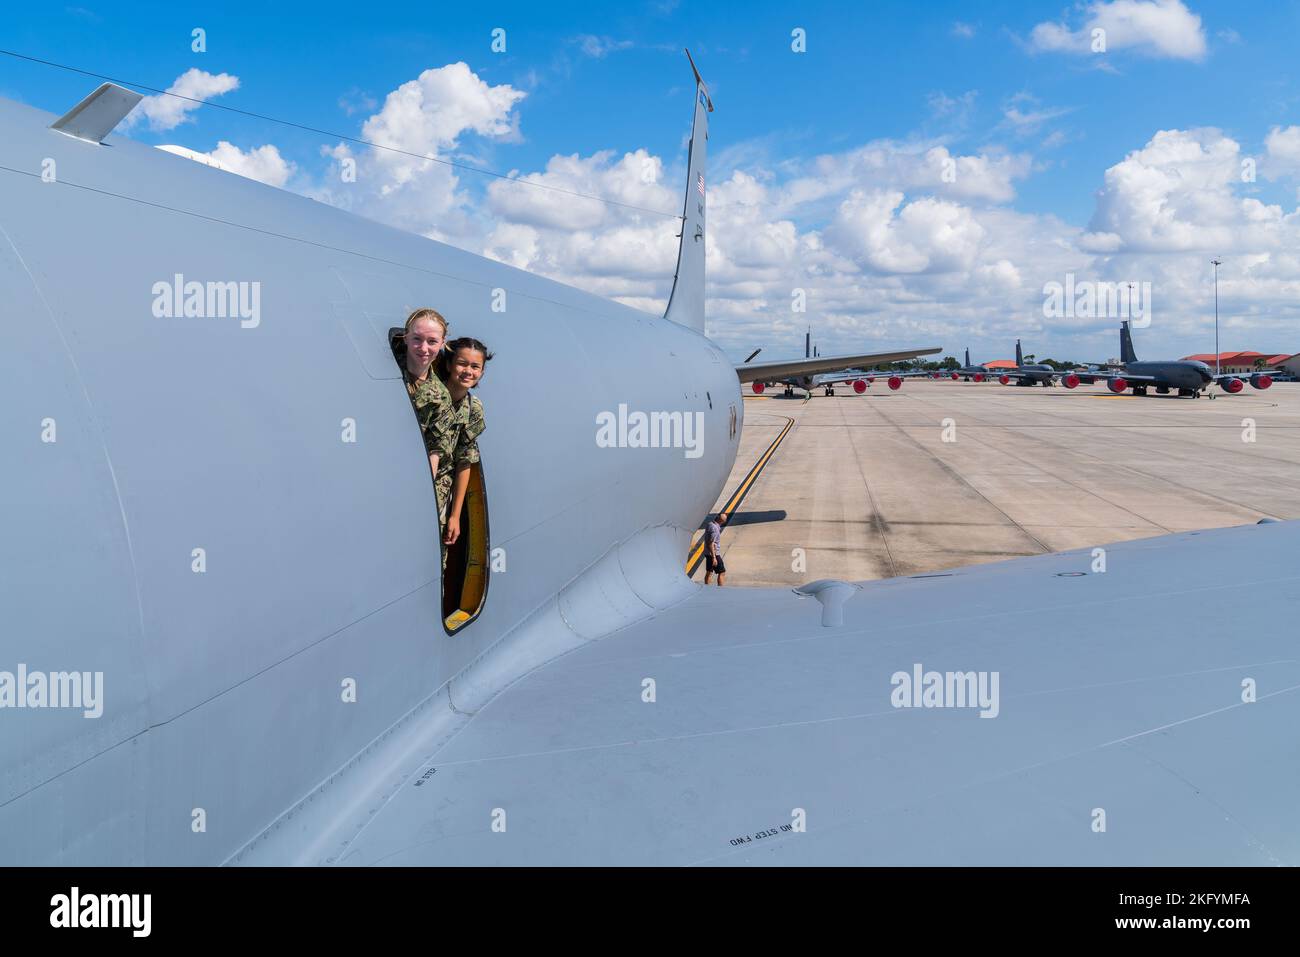 https://c8.alamy.com/comp/2KFYMFA/naval-sea-cadets-with-the-american-victory-division-pose-for-a-photo-on-a-kc-135-stratotanker-aircraft-assigned-to-the-6th-air-refueling-wing-at-macdill-air-force-base-florida-oct-15-2022-the-naval-sea-cadets-along-with-university-of-central-florida-rotc-cadets-and-local-hillsborough-county-students-participated-in-an-aviation-inspiration-mentorship-event-that-included-a-meet-and-greet-with-instructor-pilots-assigned-to-the-85th-flying-training-squadron-and-a-kc-135-static-display-2KFYMFA.jpg